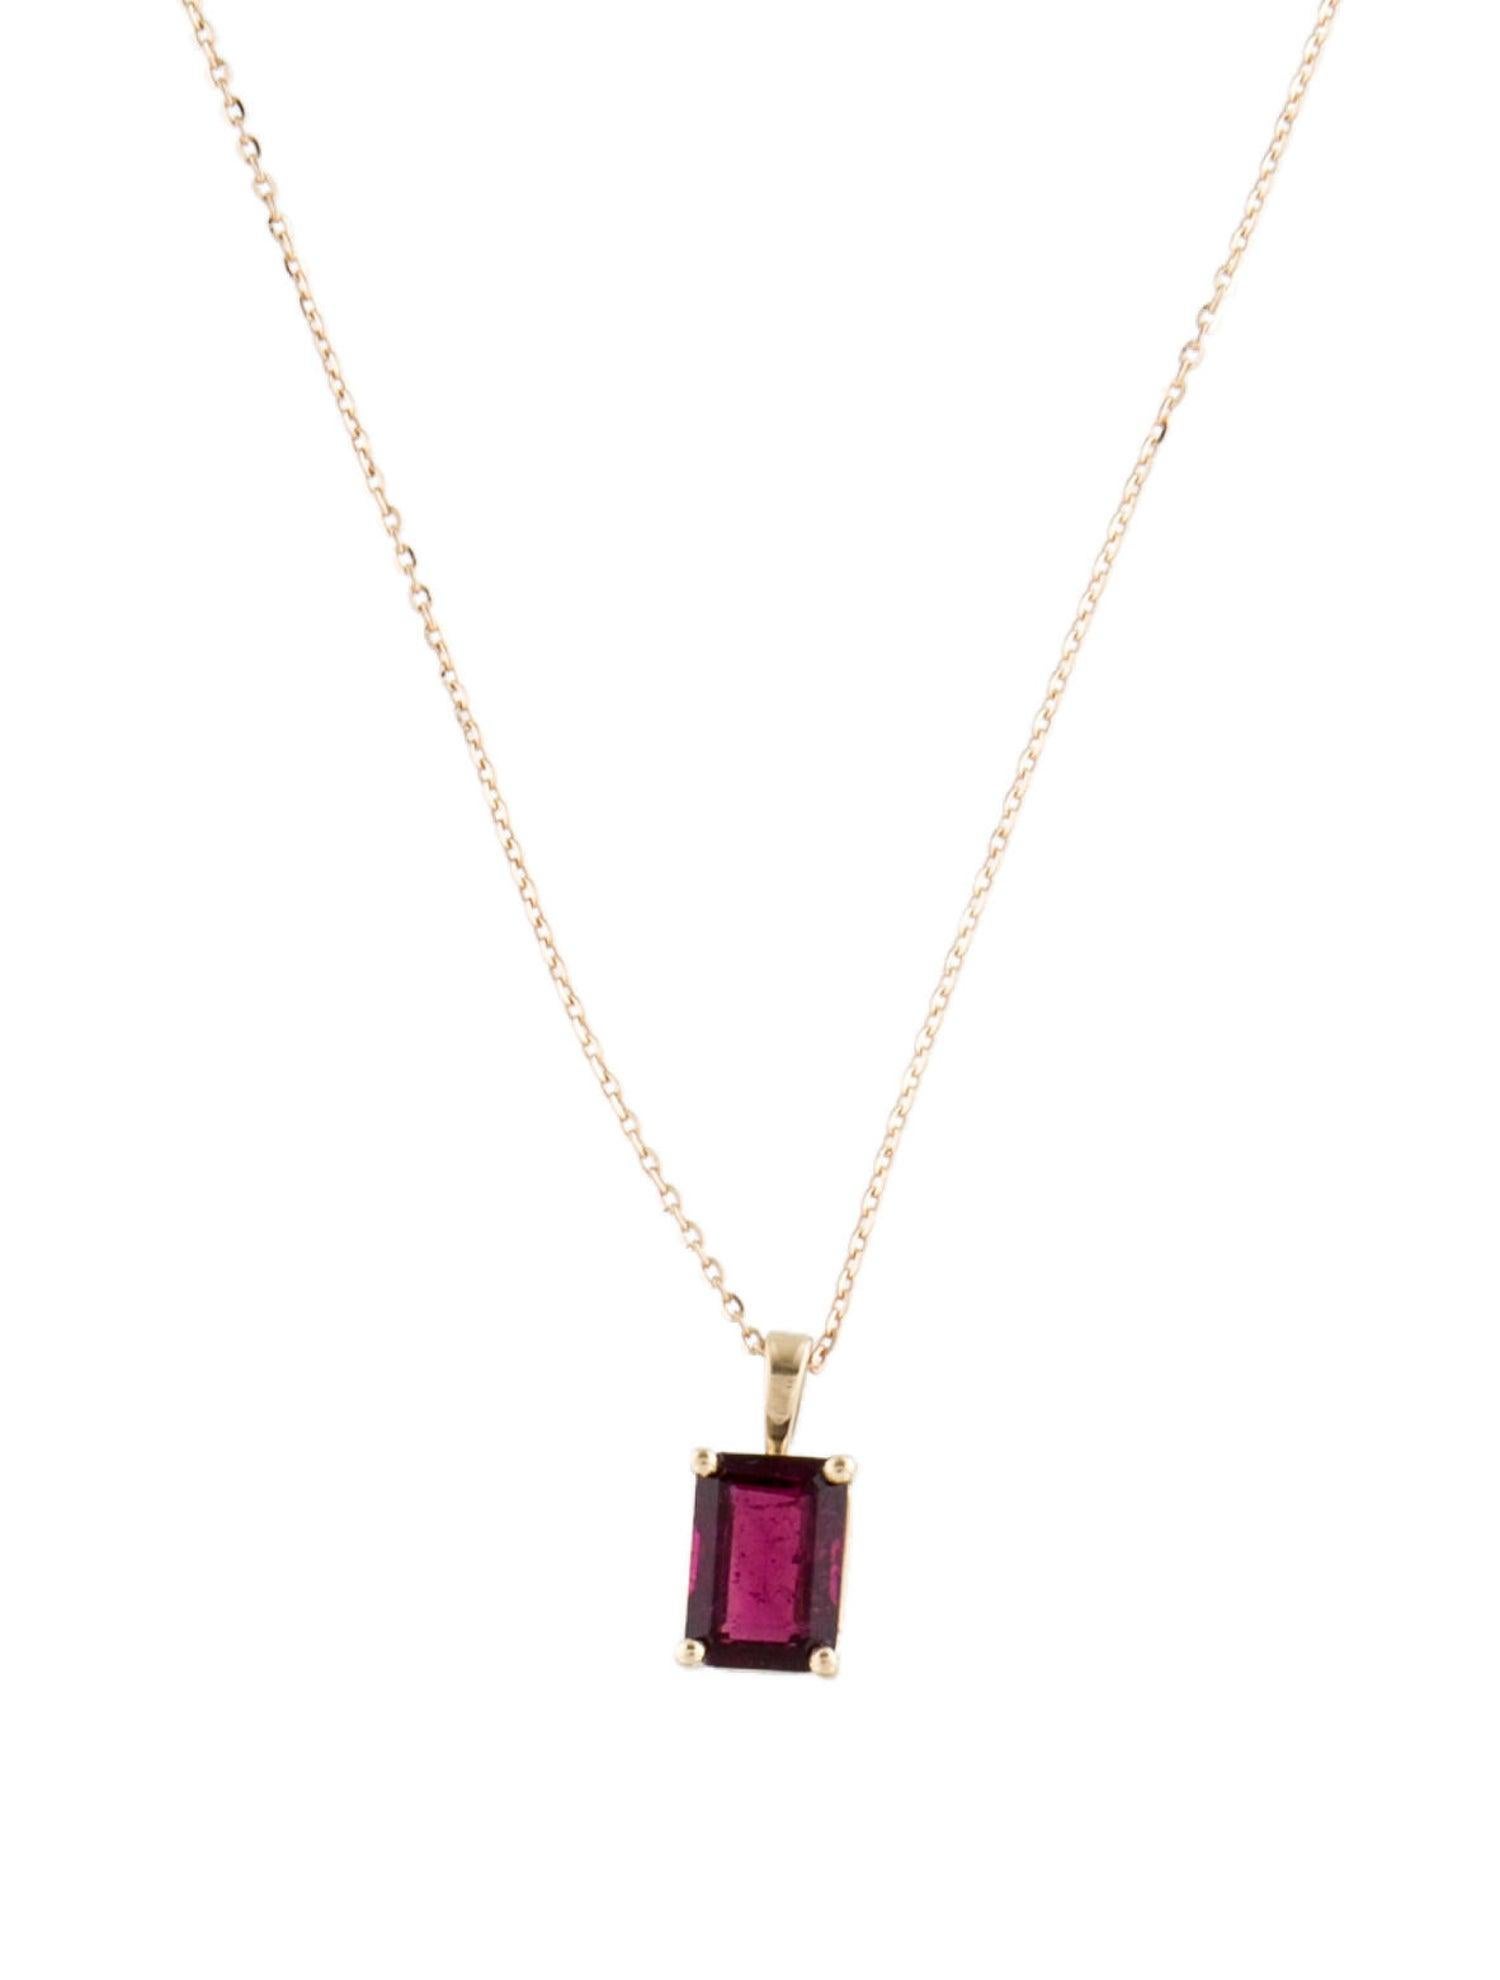 Introducing our exquisite 14K Yellow Gold Pink Tourmaline Pendant Necklace, a piece that epitomizes grace and sophistication. This necklace features a stunning 1.49 carat cut cornered rectangular step cut Tourmaline, radiating a captivating pink hue